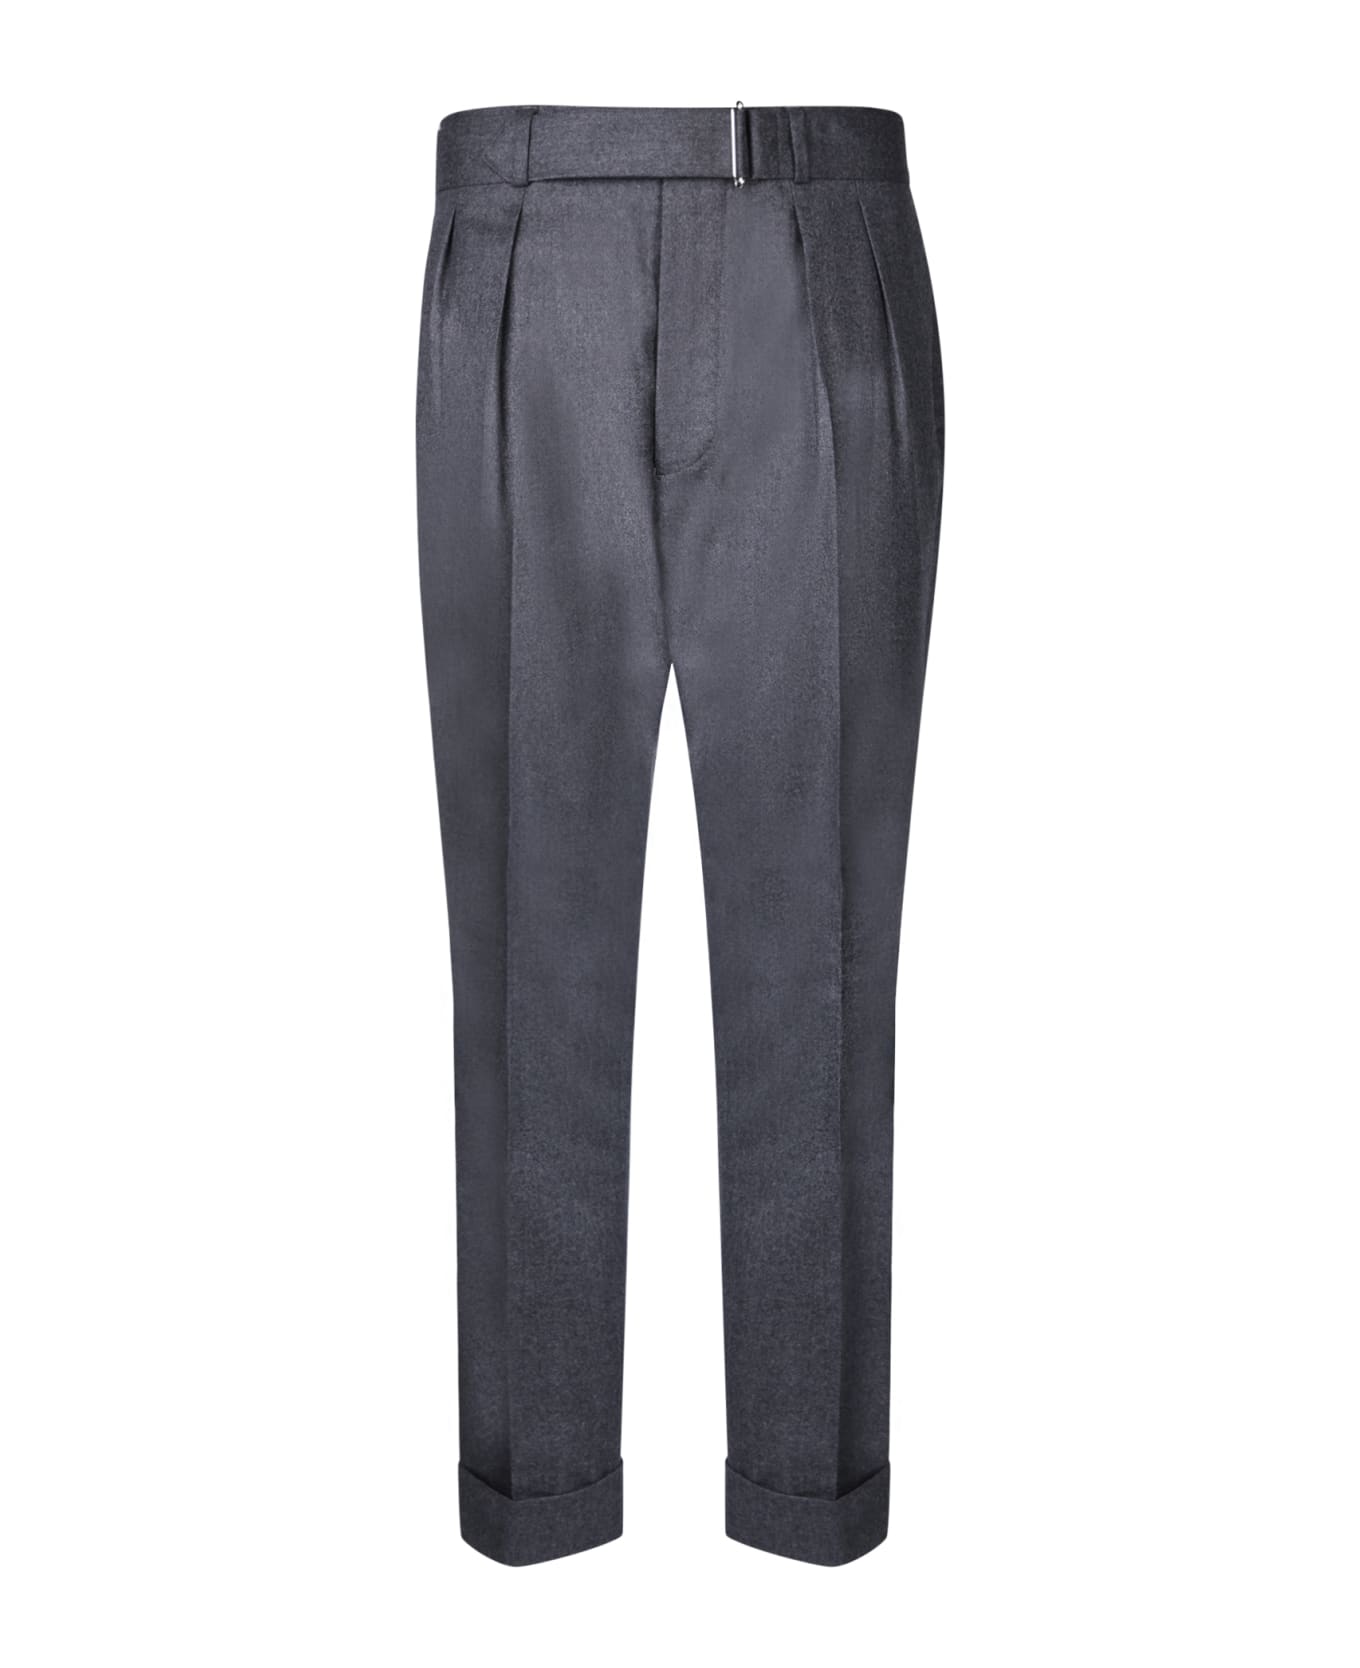 Officine Générale Pierre Grey Trousers - Grey ボトムス